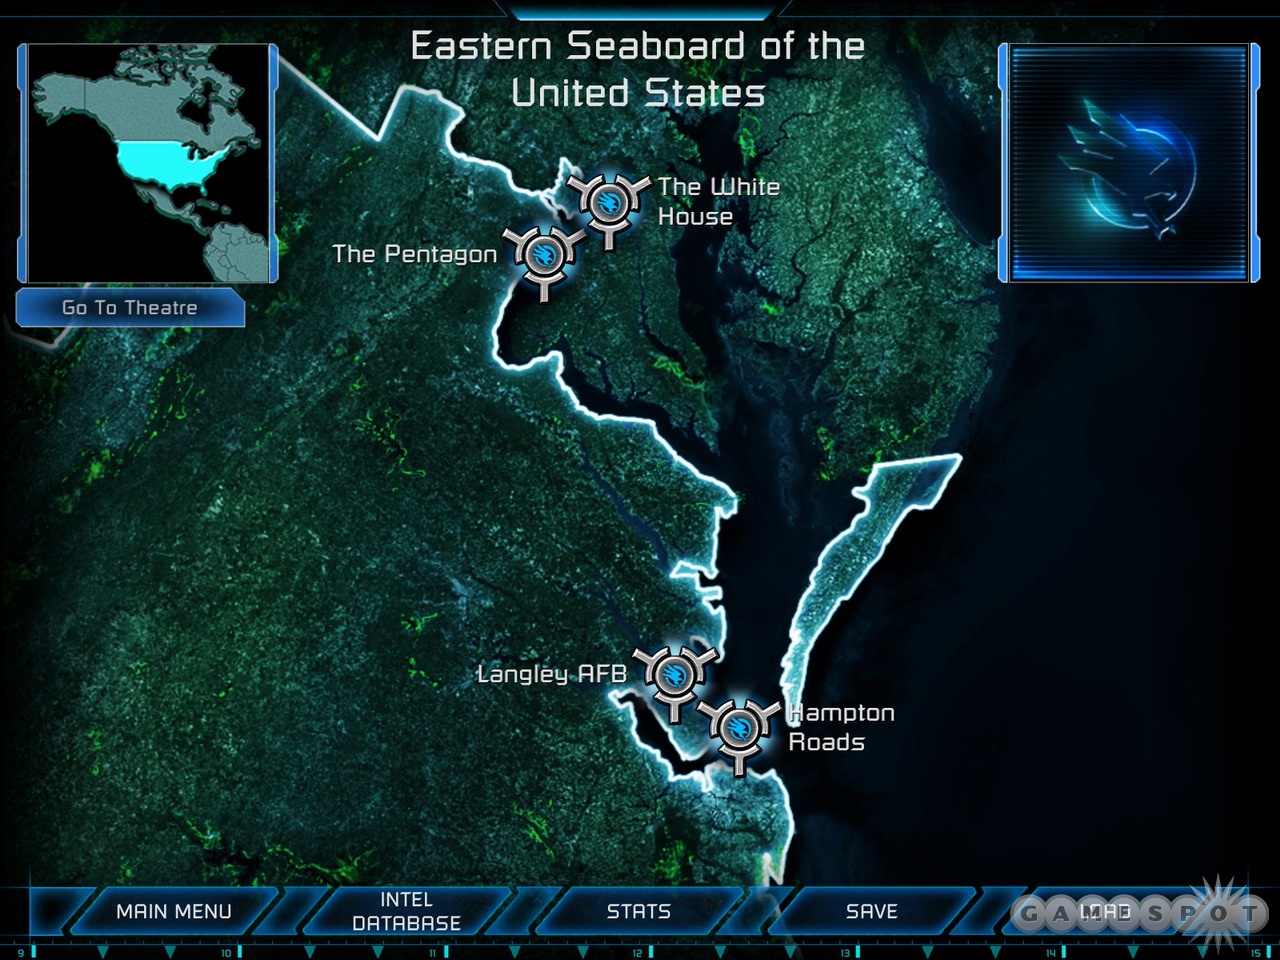 The Eastern seaboard is in trouble, and you, as GDI commander, must save it.